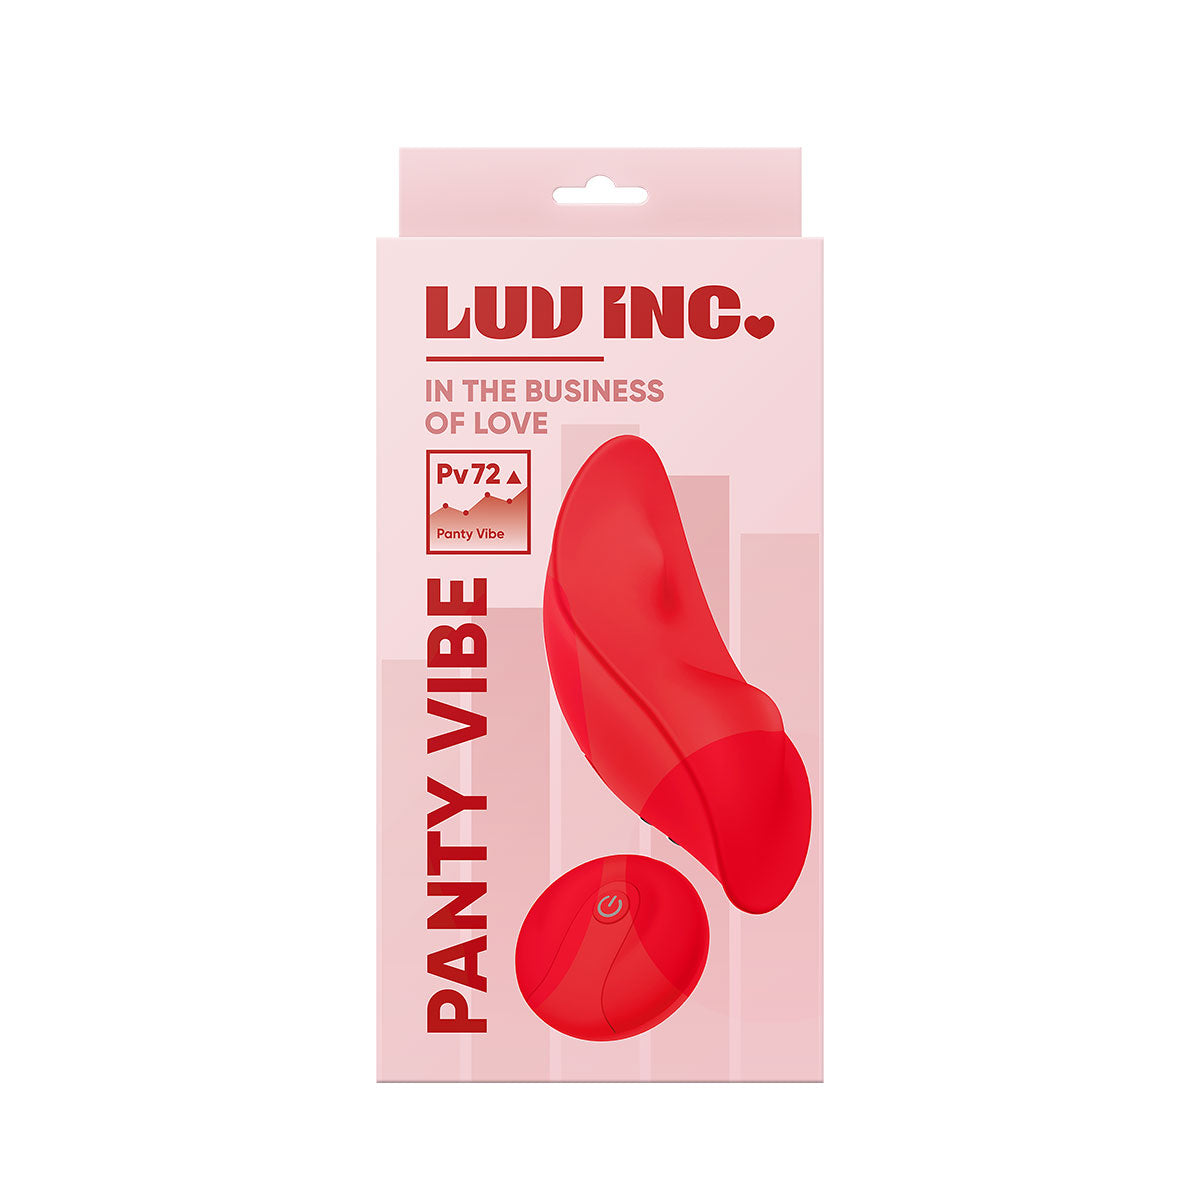 Luv Inc Panty Vibe - Assorted Colors